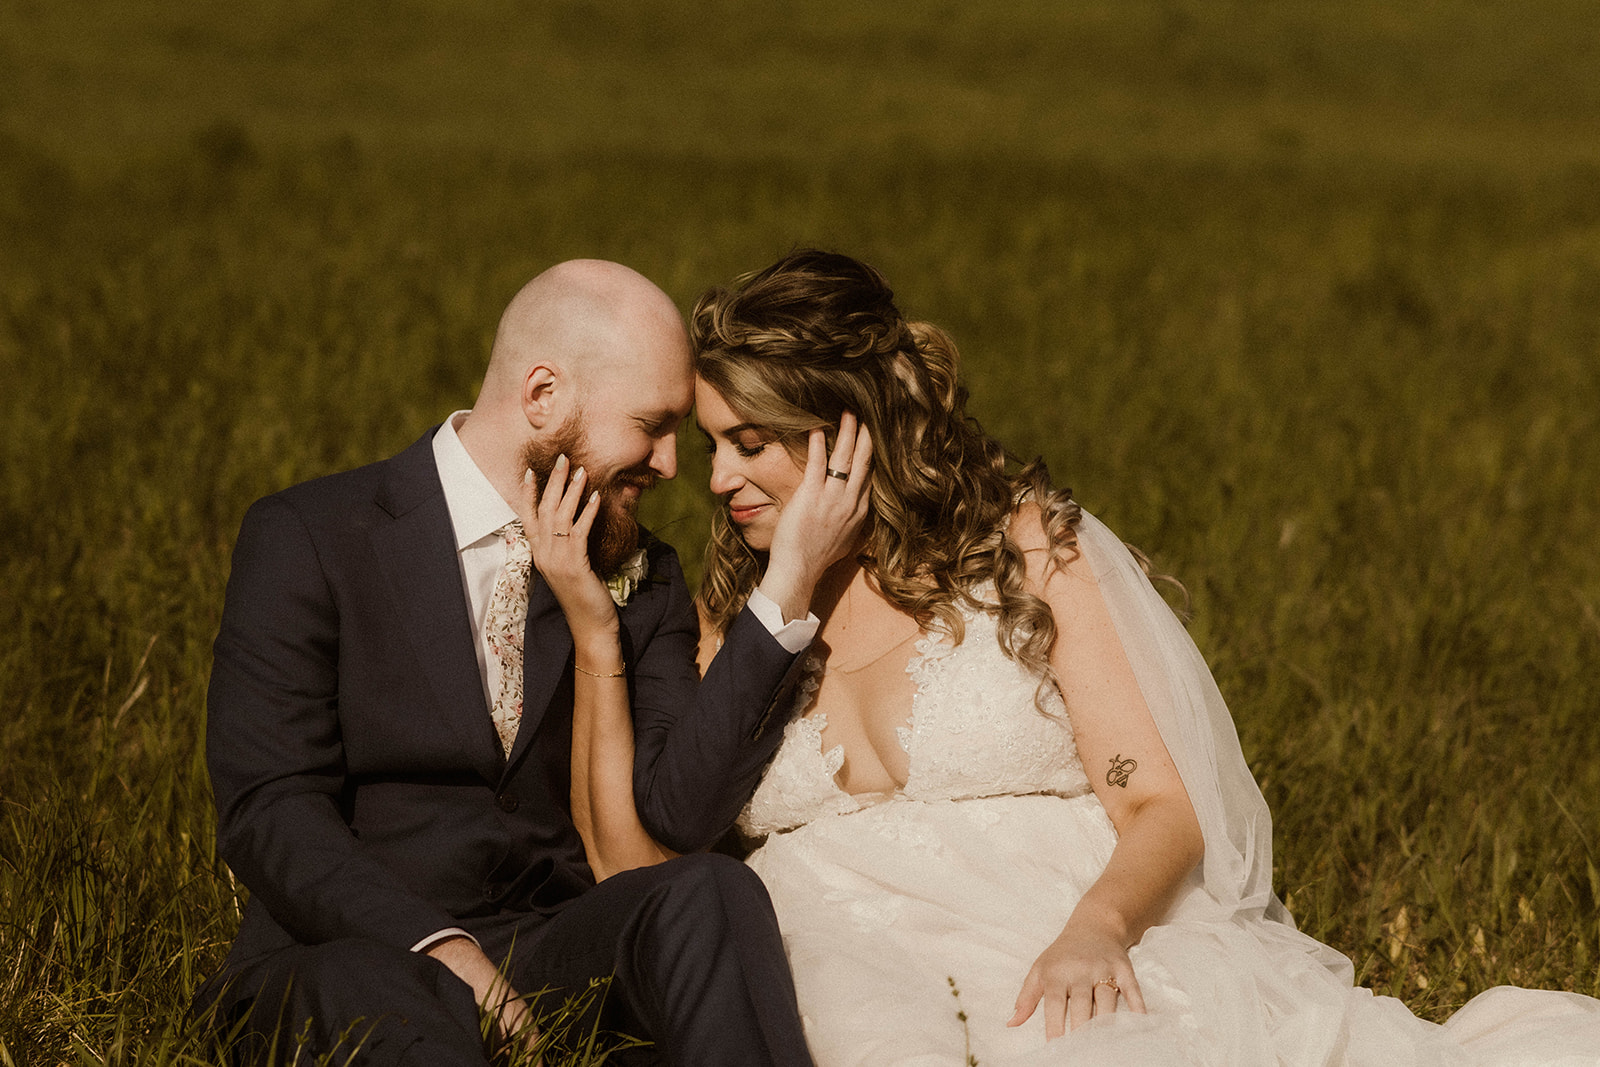 Stunning bride and groom sit together and share an intimate moment after their wedding